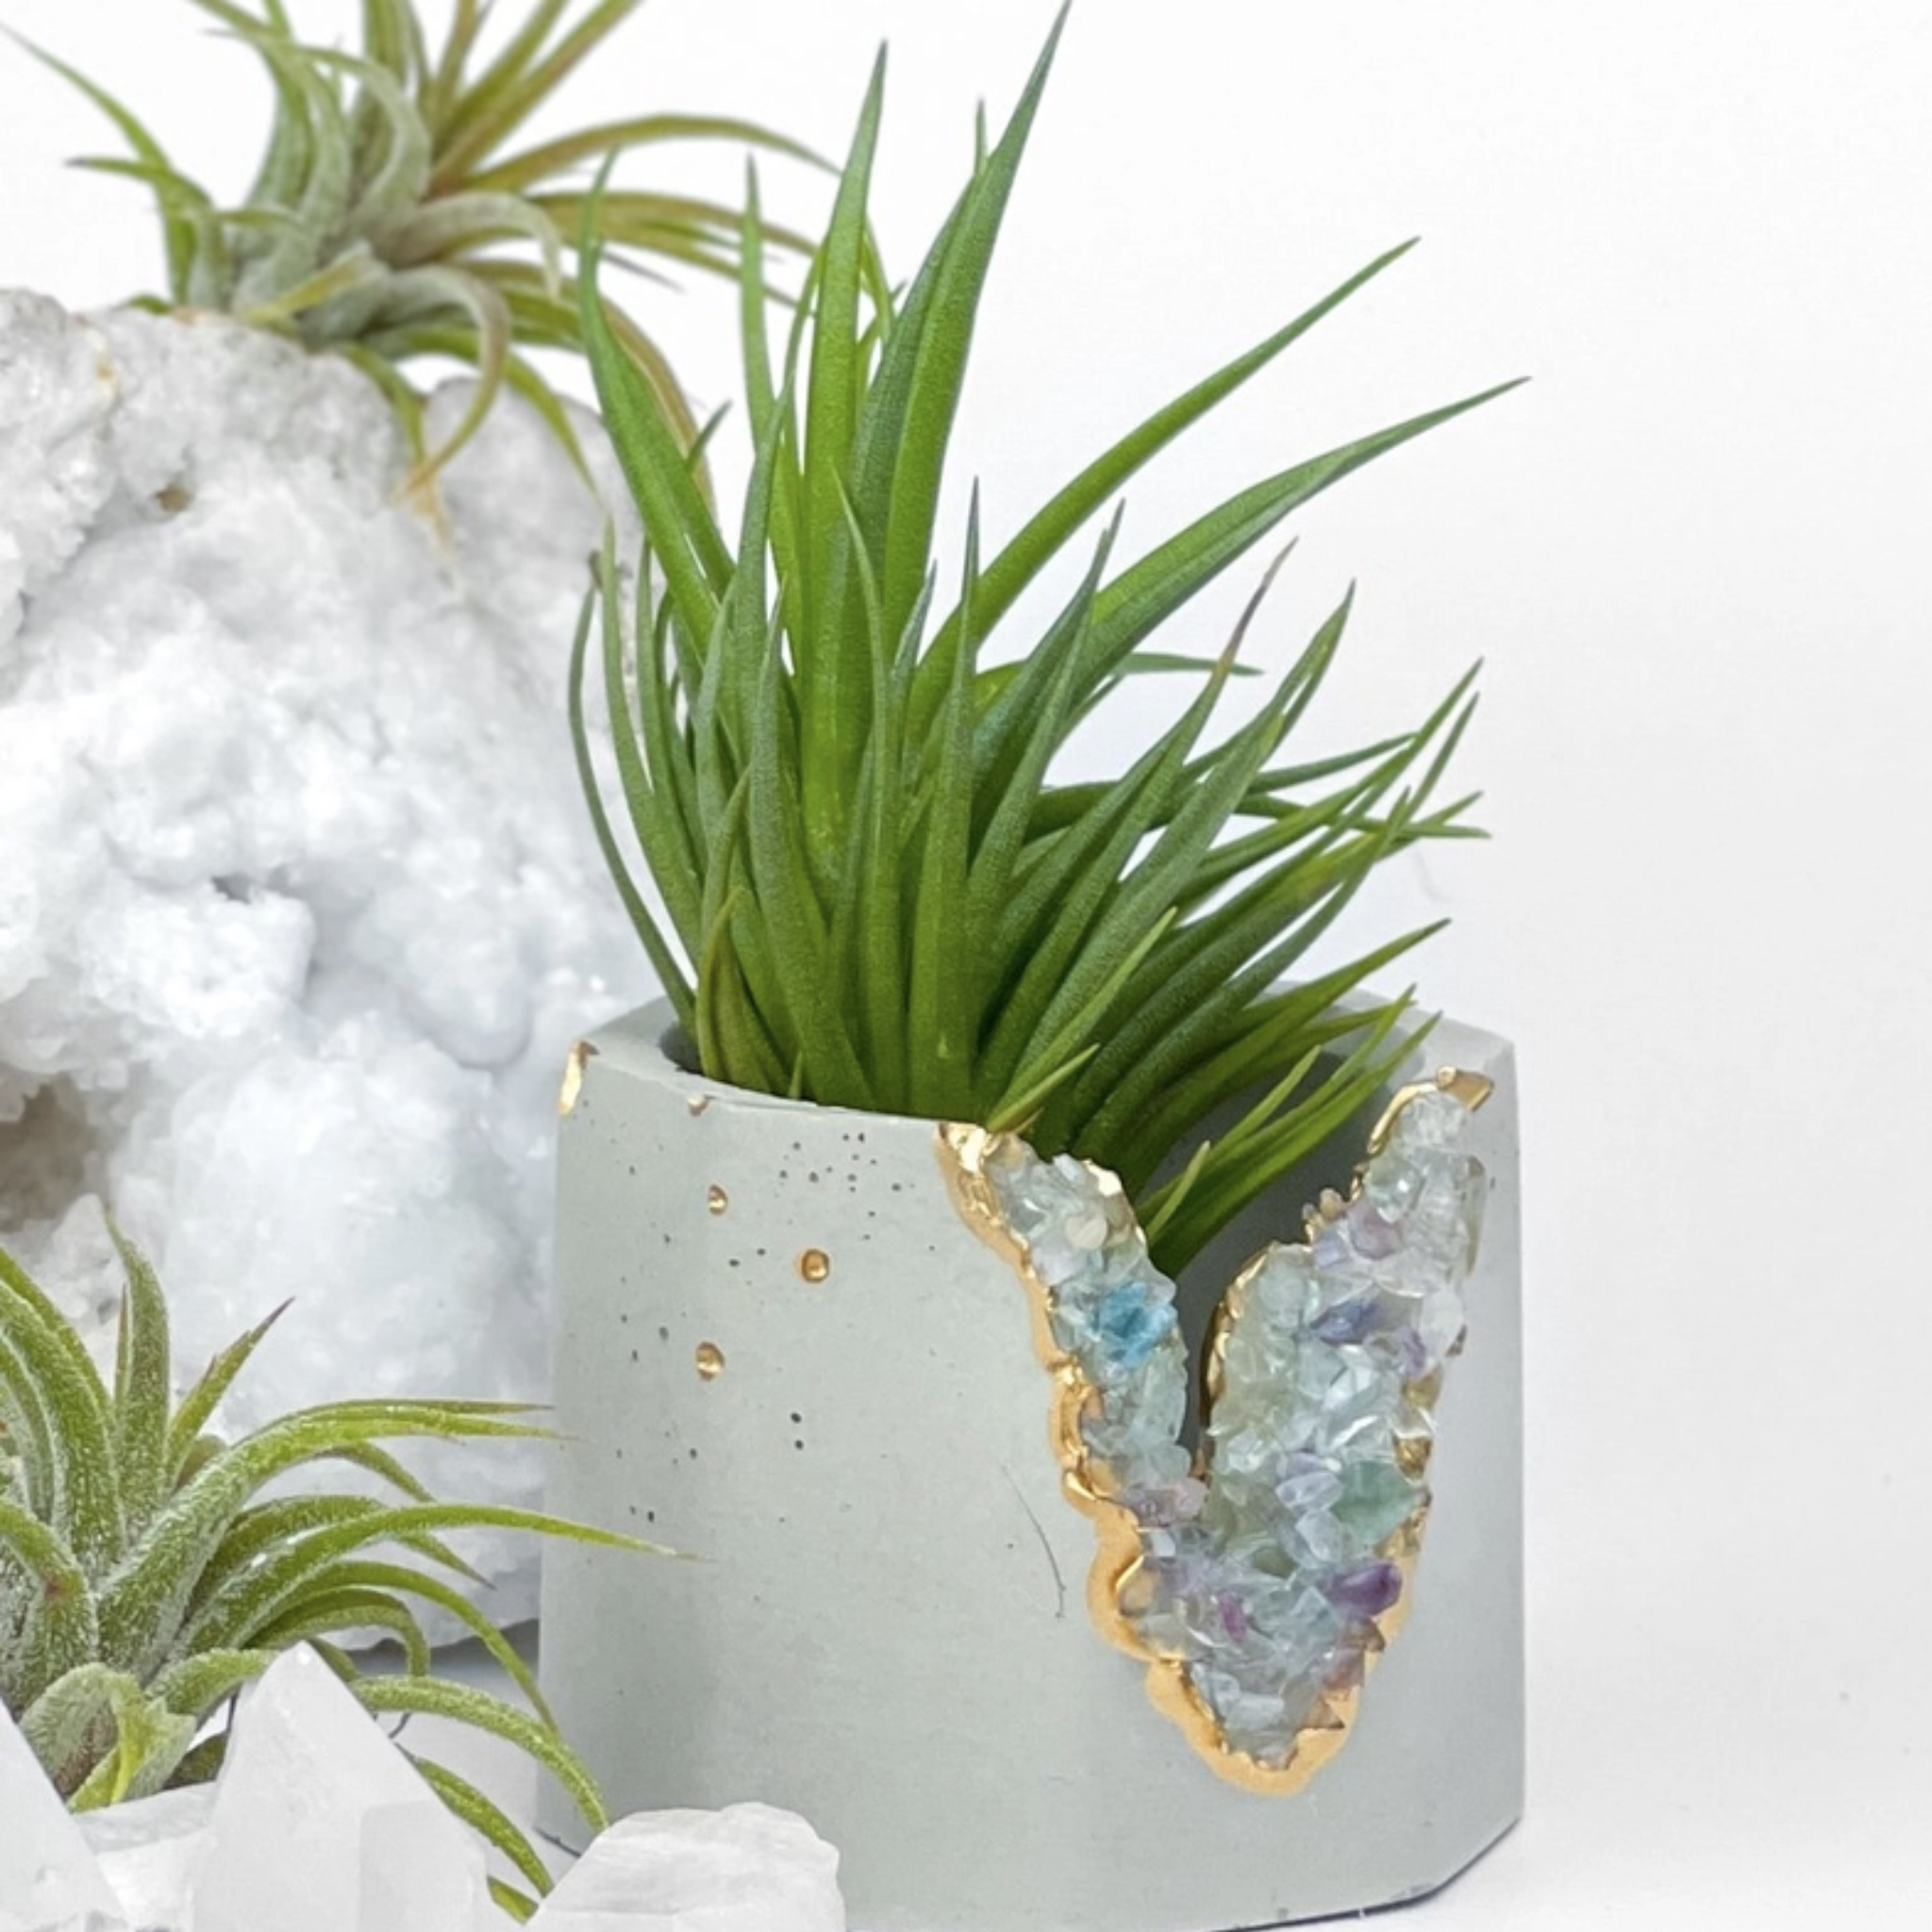 Crystal Geode Planter Pot with Plant Included!